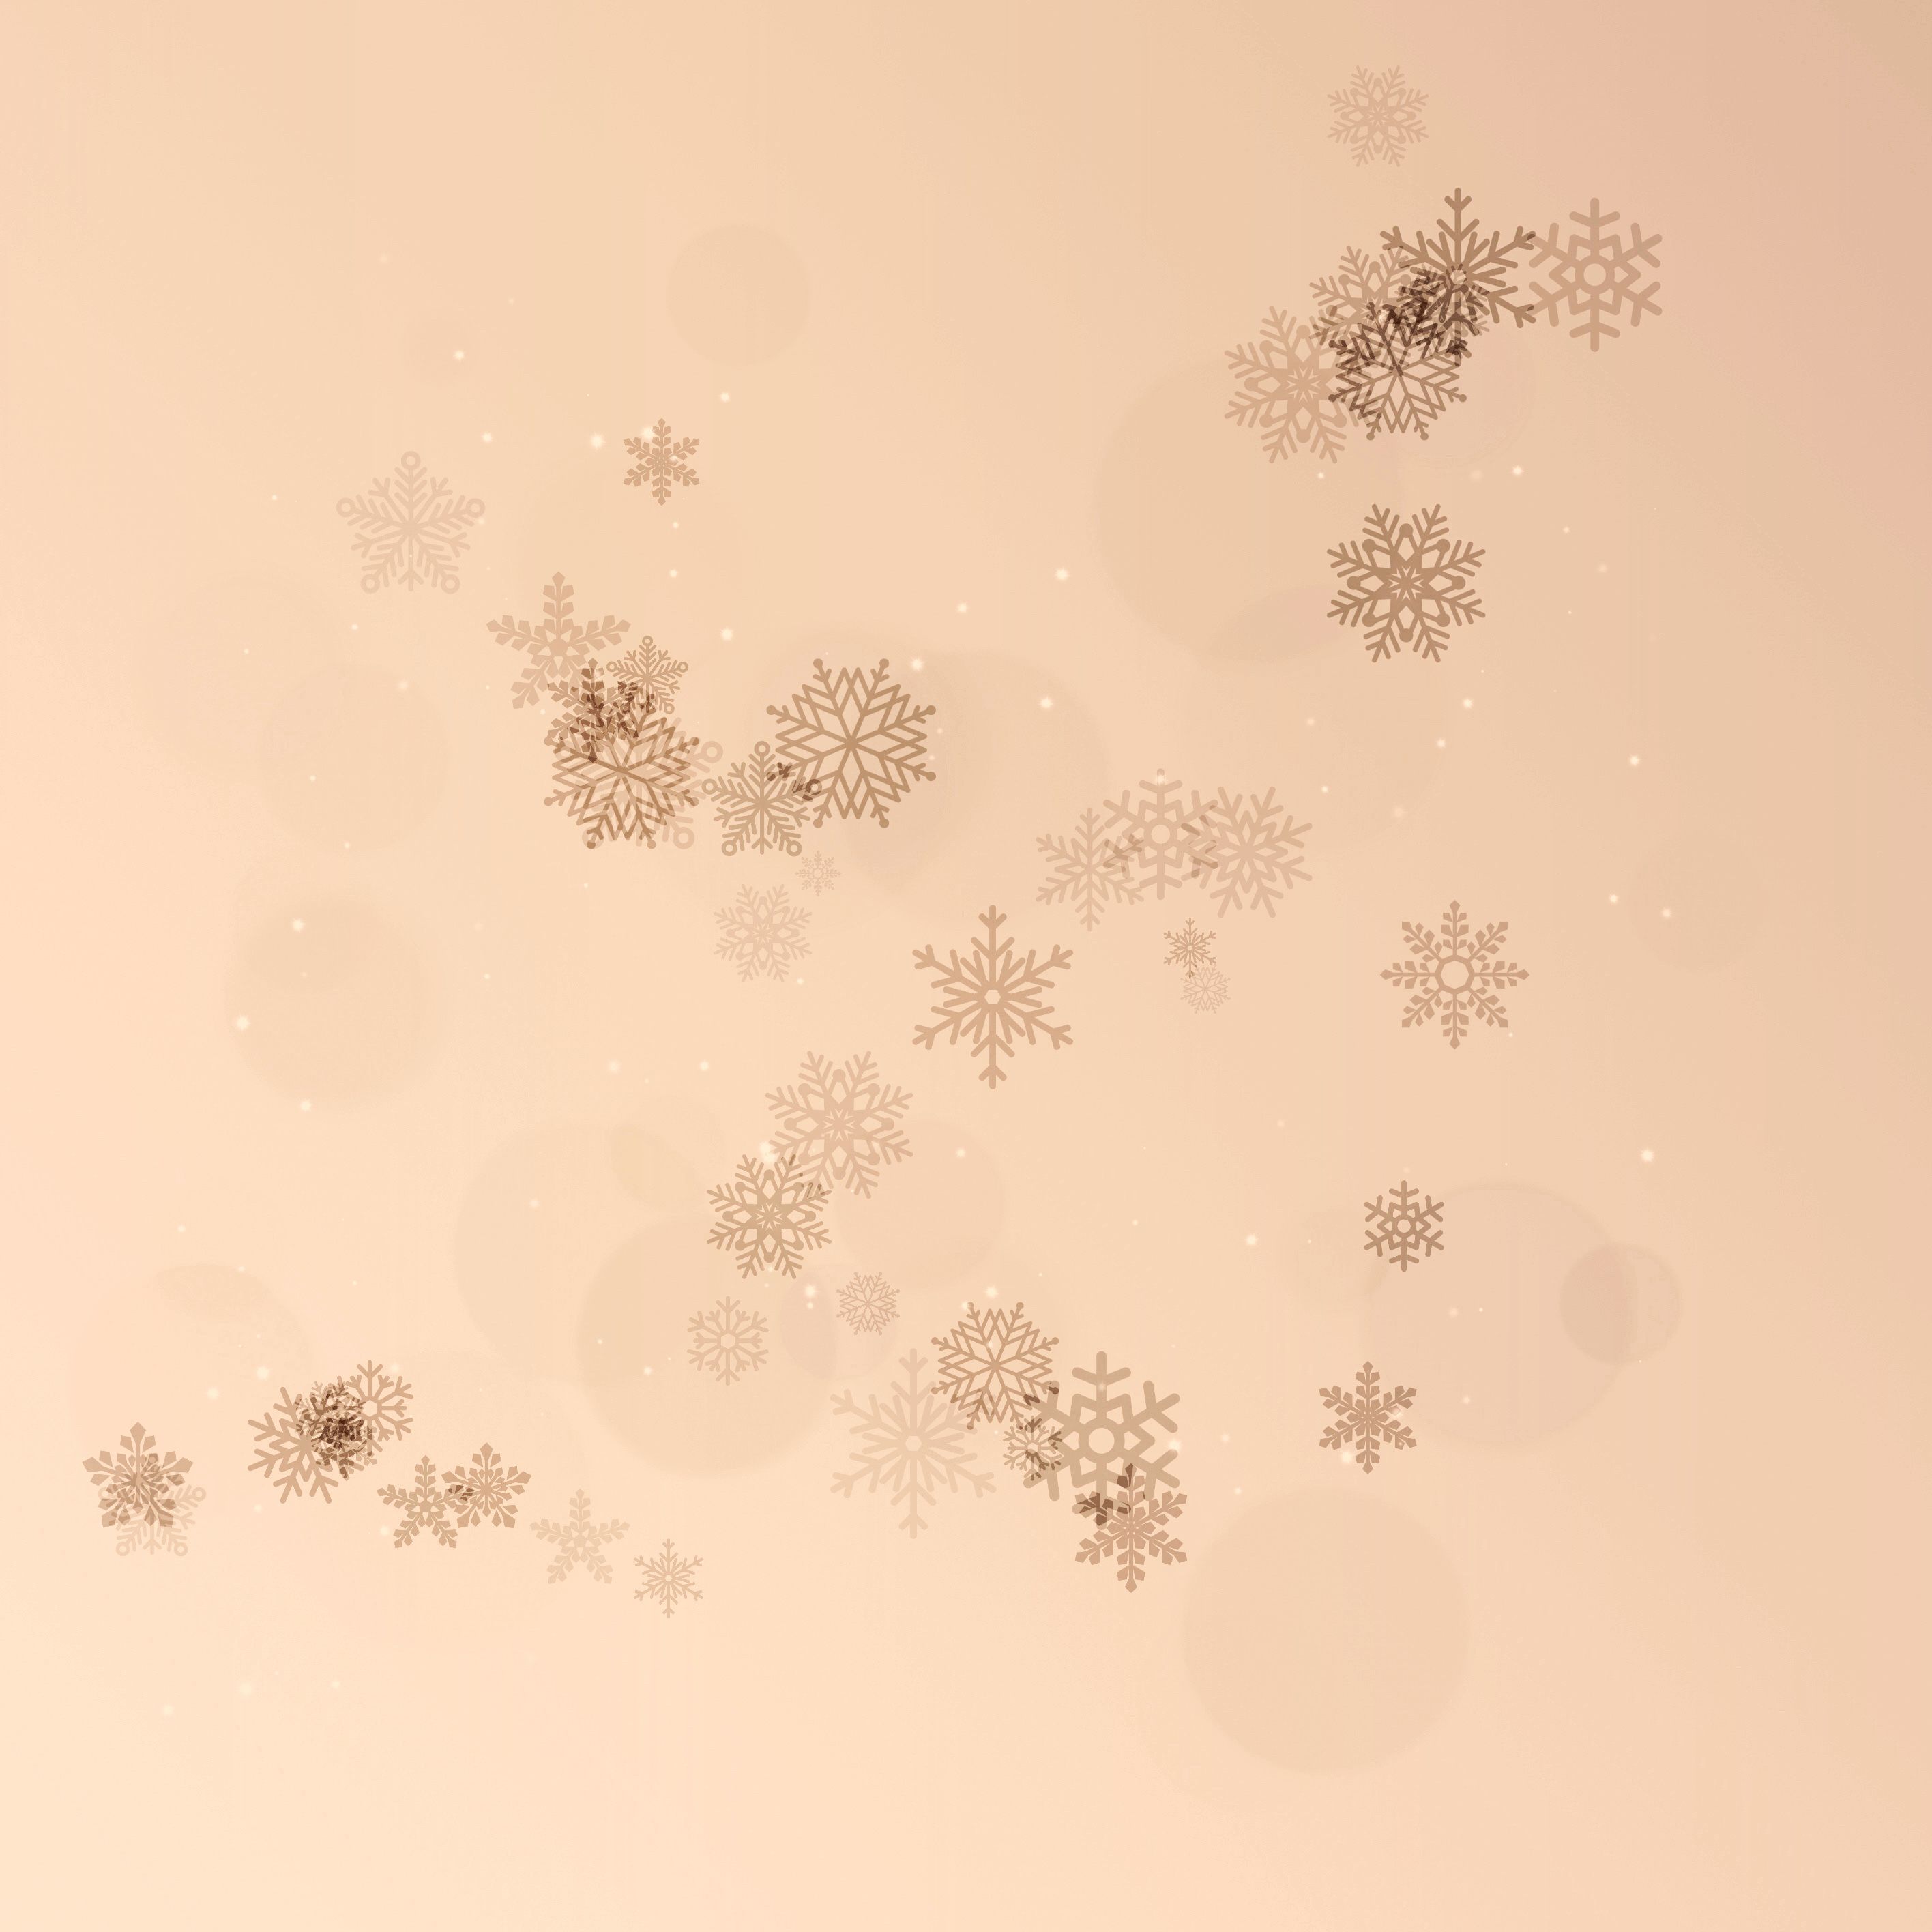 Falling snowflakes wallpaper to match iPhone 13 Pro colors